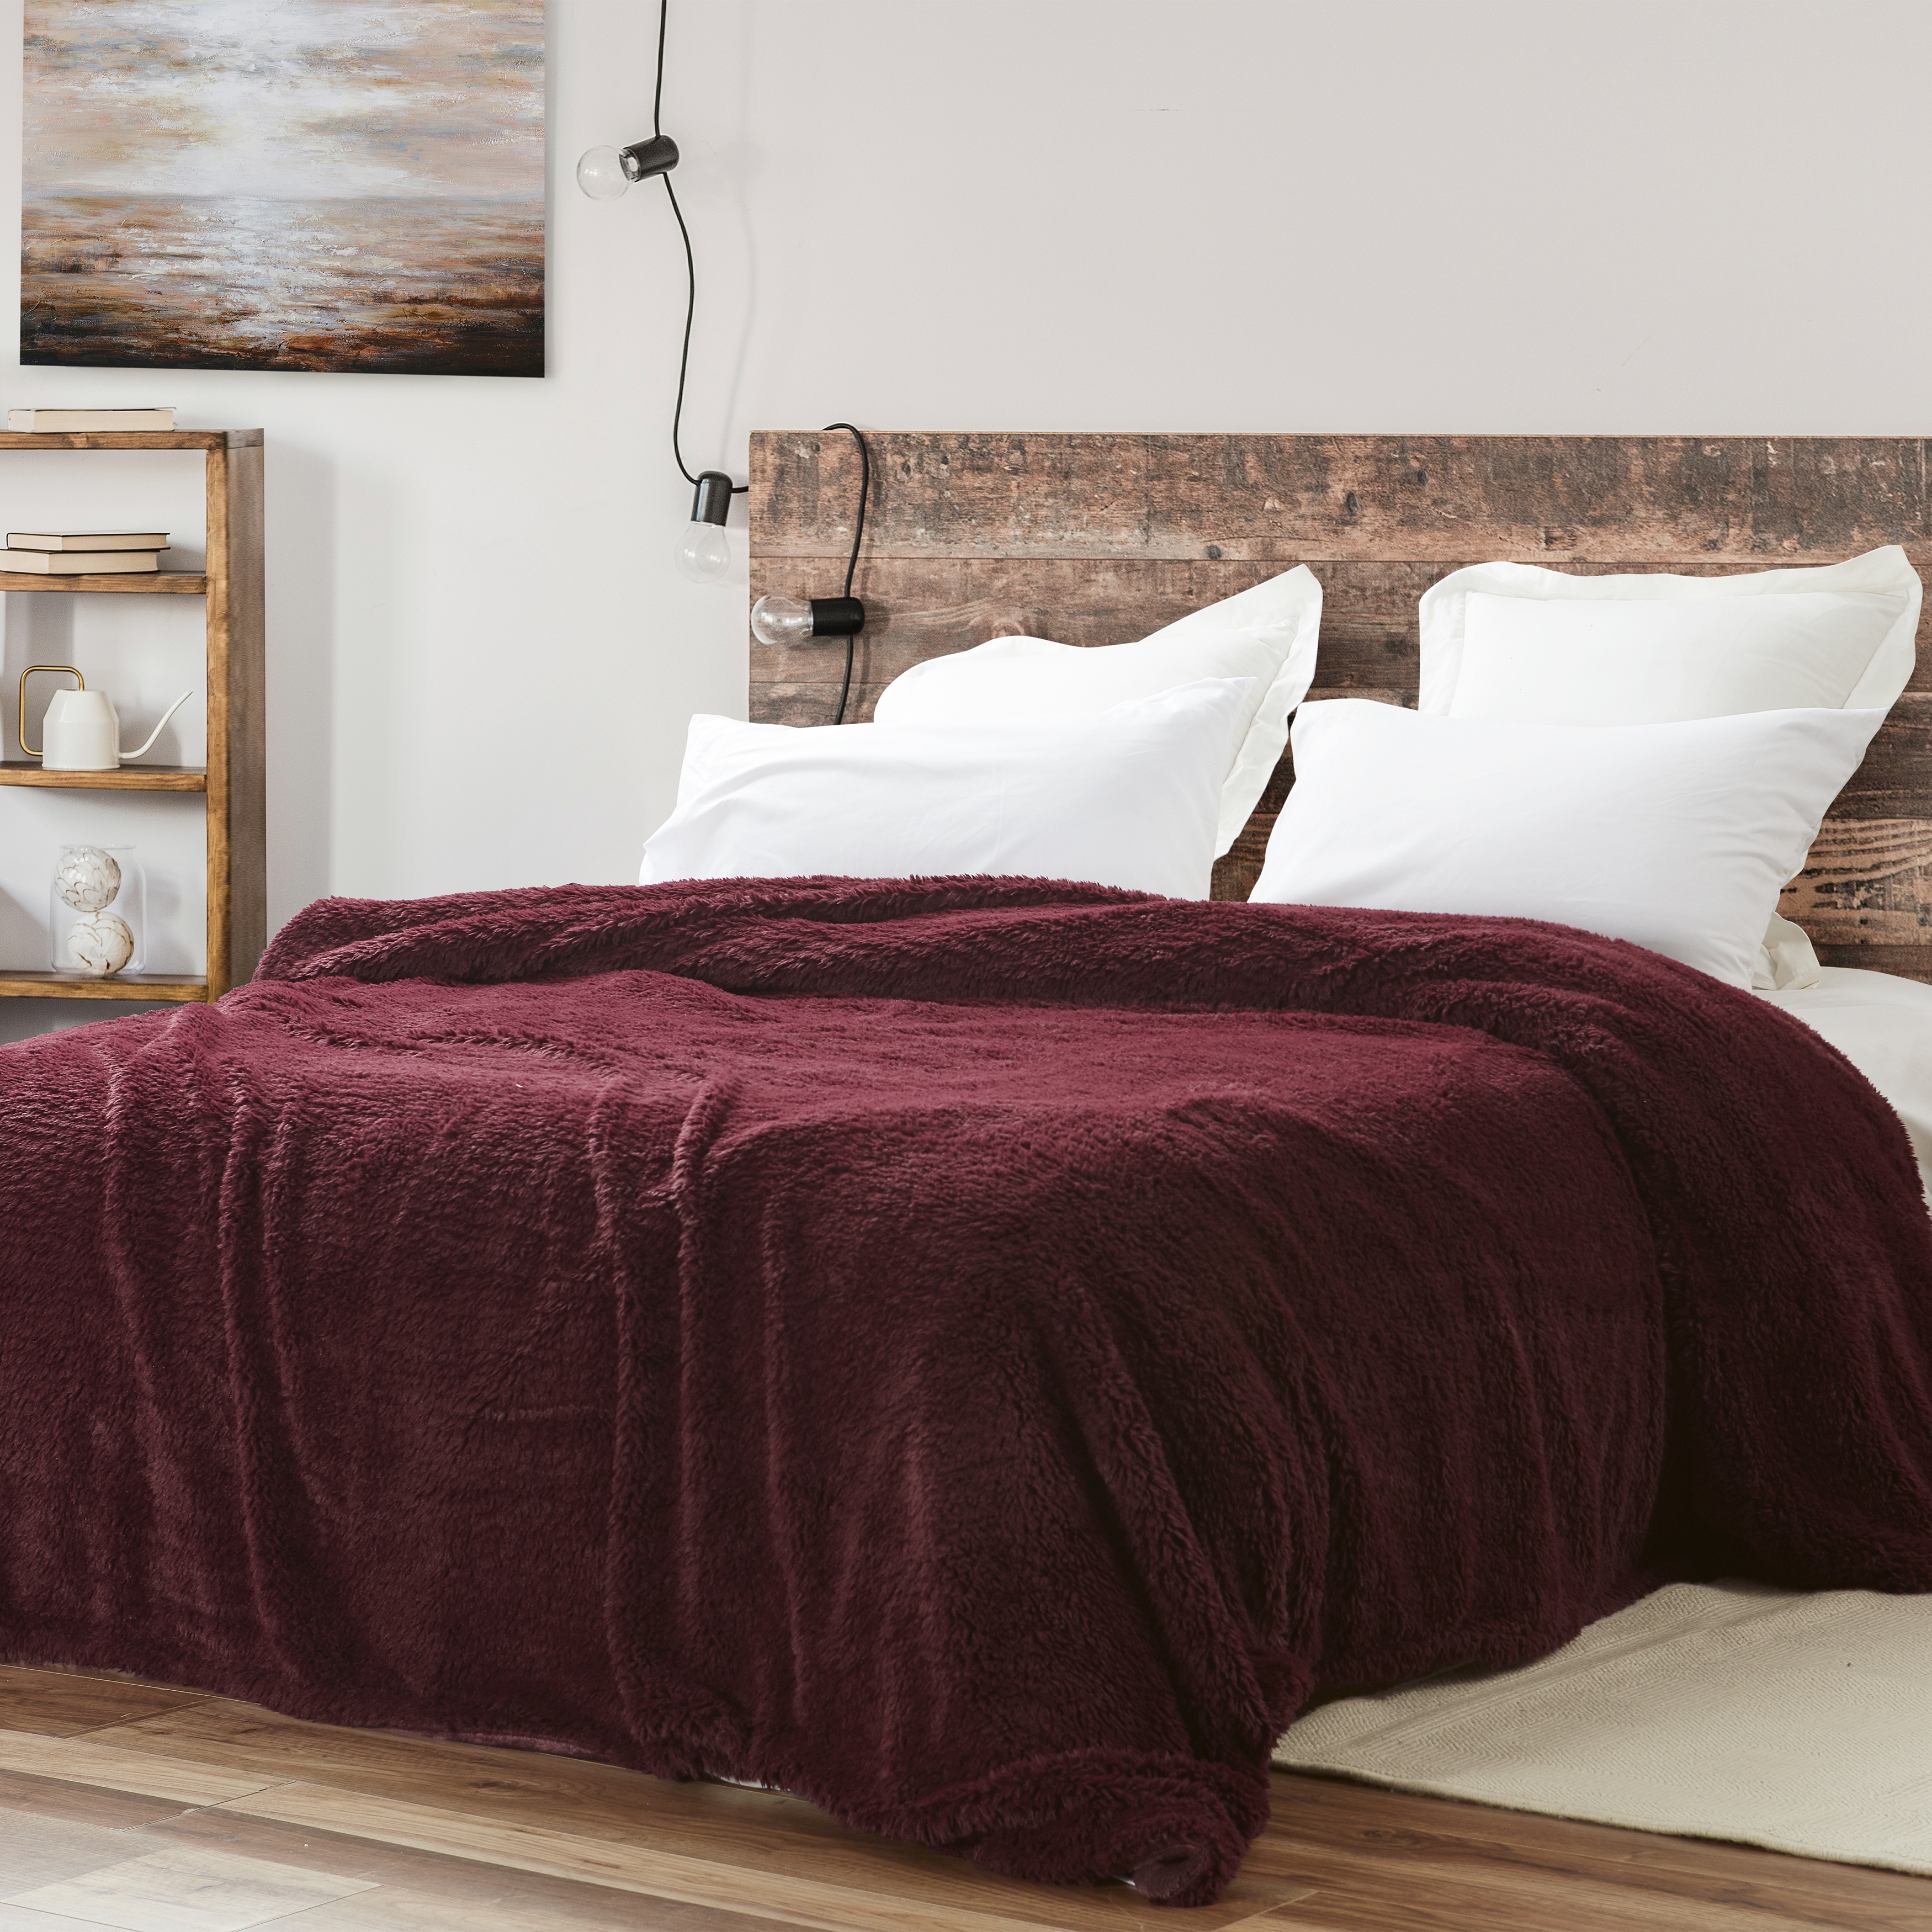 Puts This To Sleep - Coma Inducer® Full Blanket - Burgundy